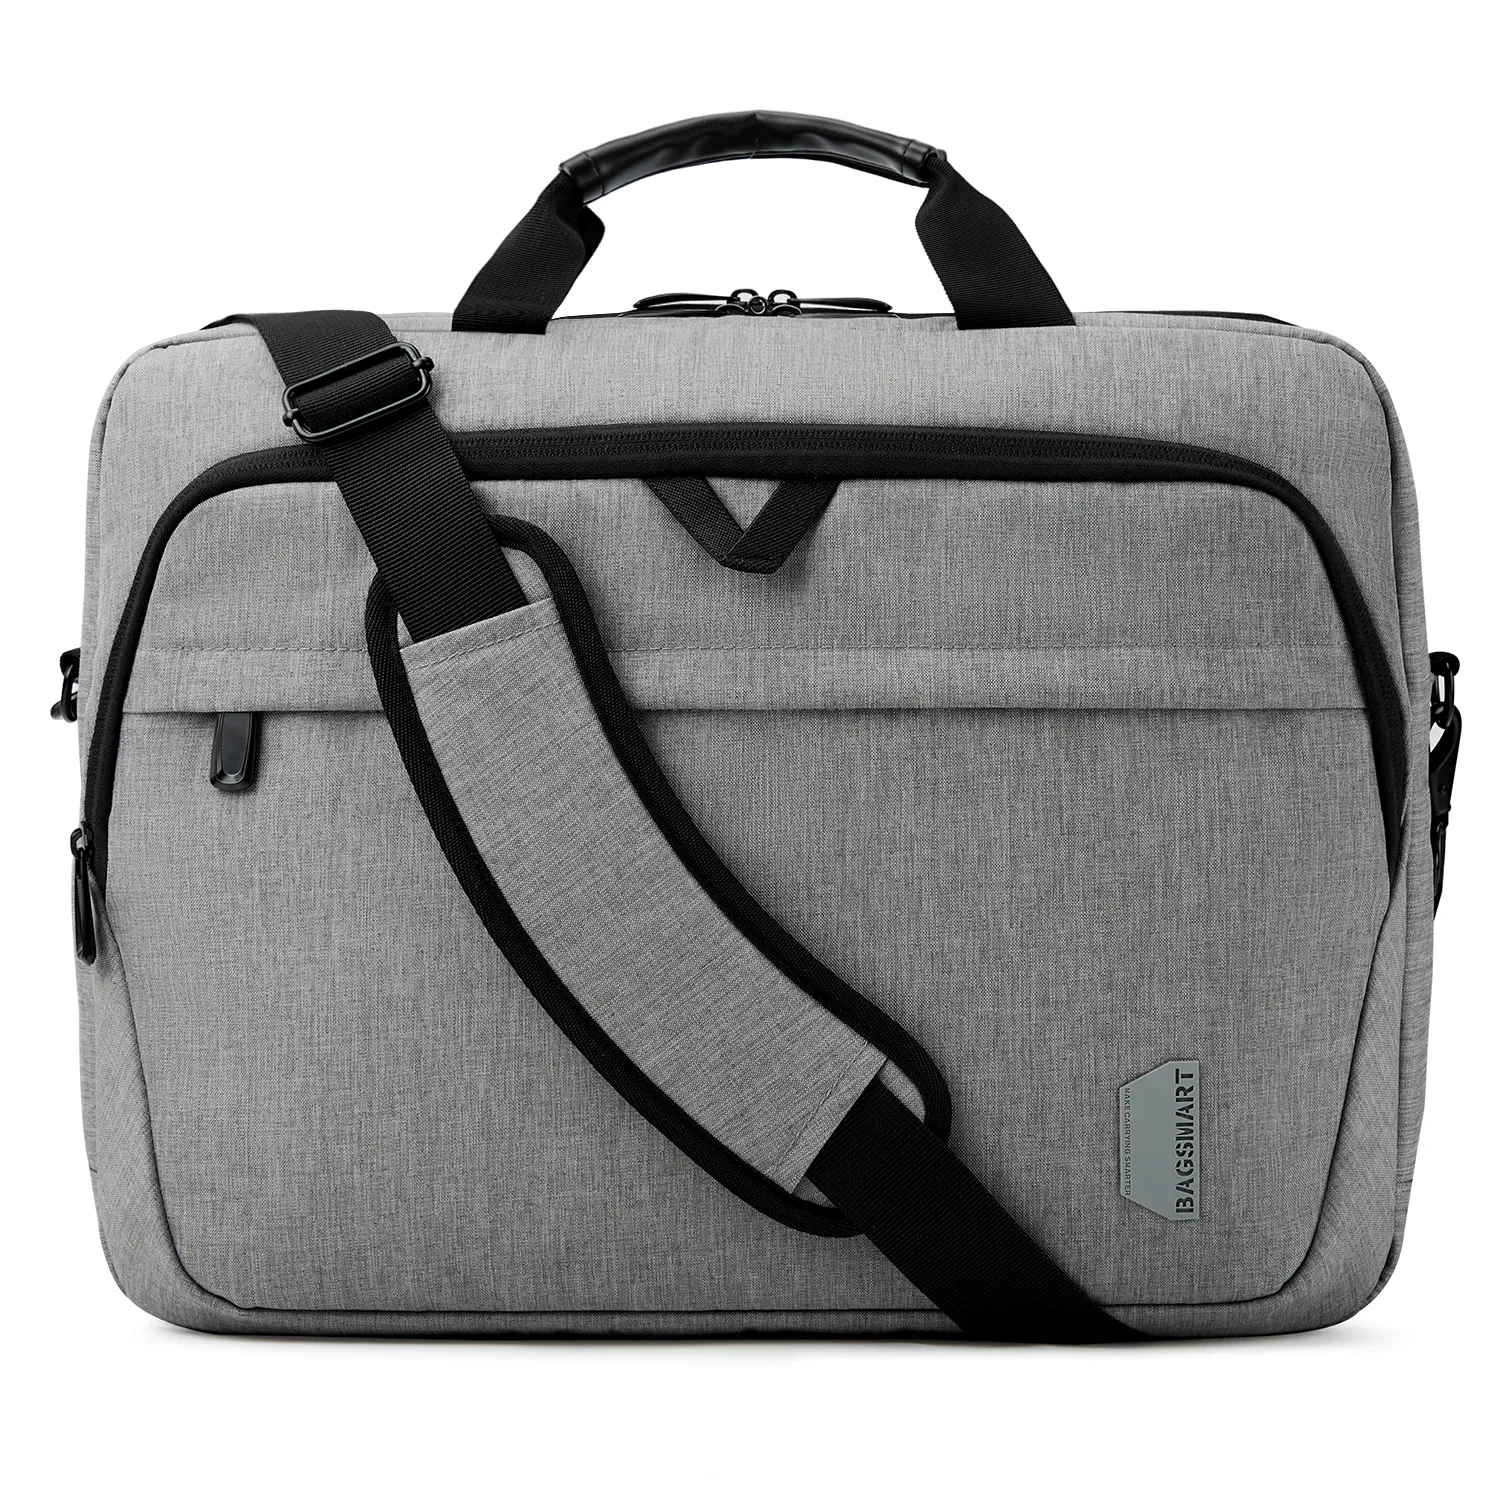 Briefcase With Shoulder Strap: Spacious 17.3-inch Laptop Bag by BAGSMART - Waterproof, Antitheft, and Expandable